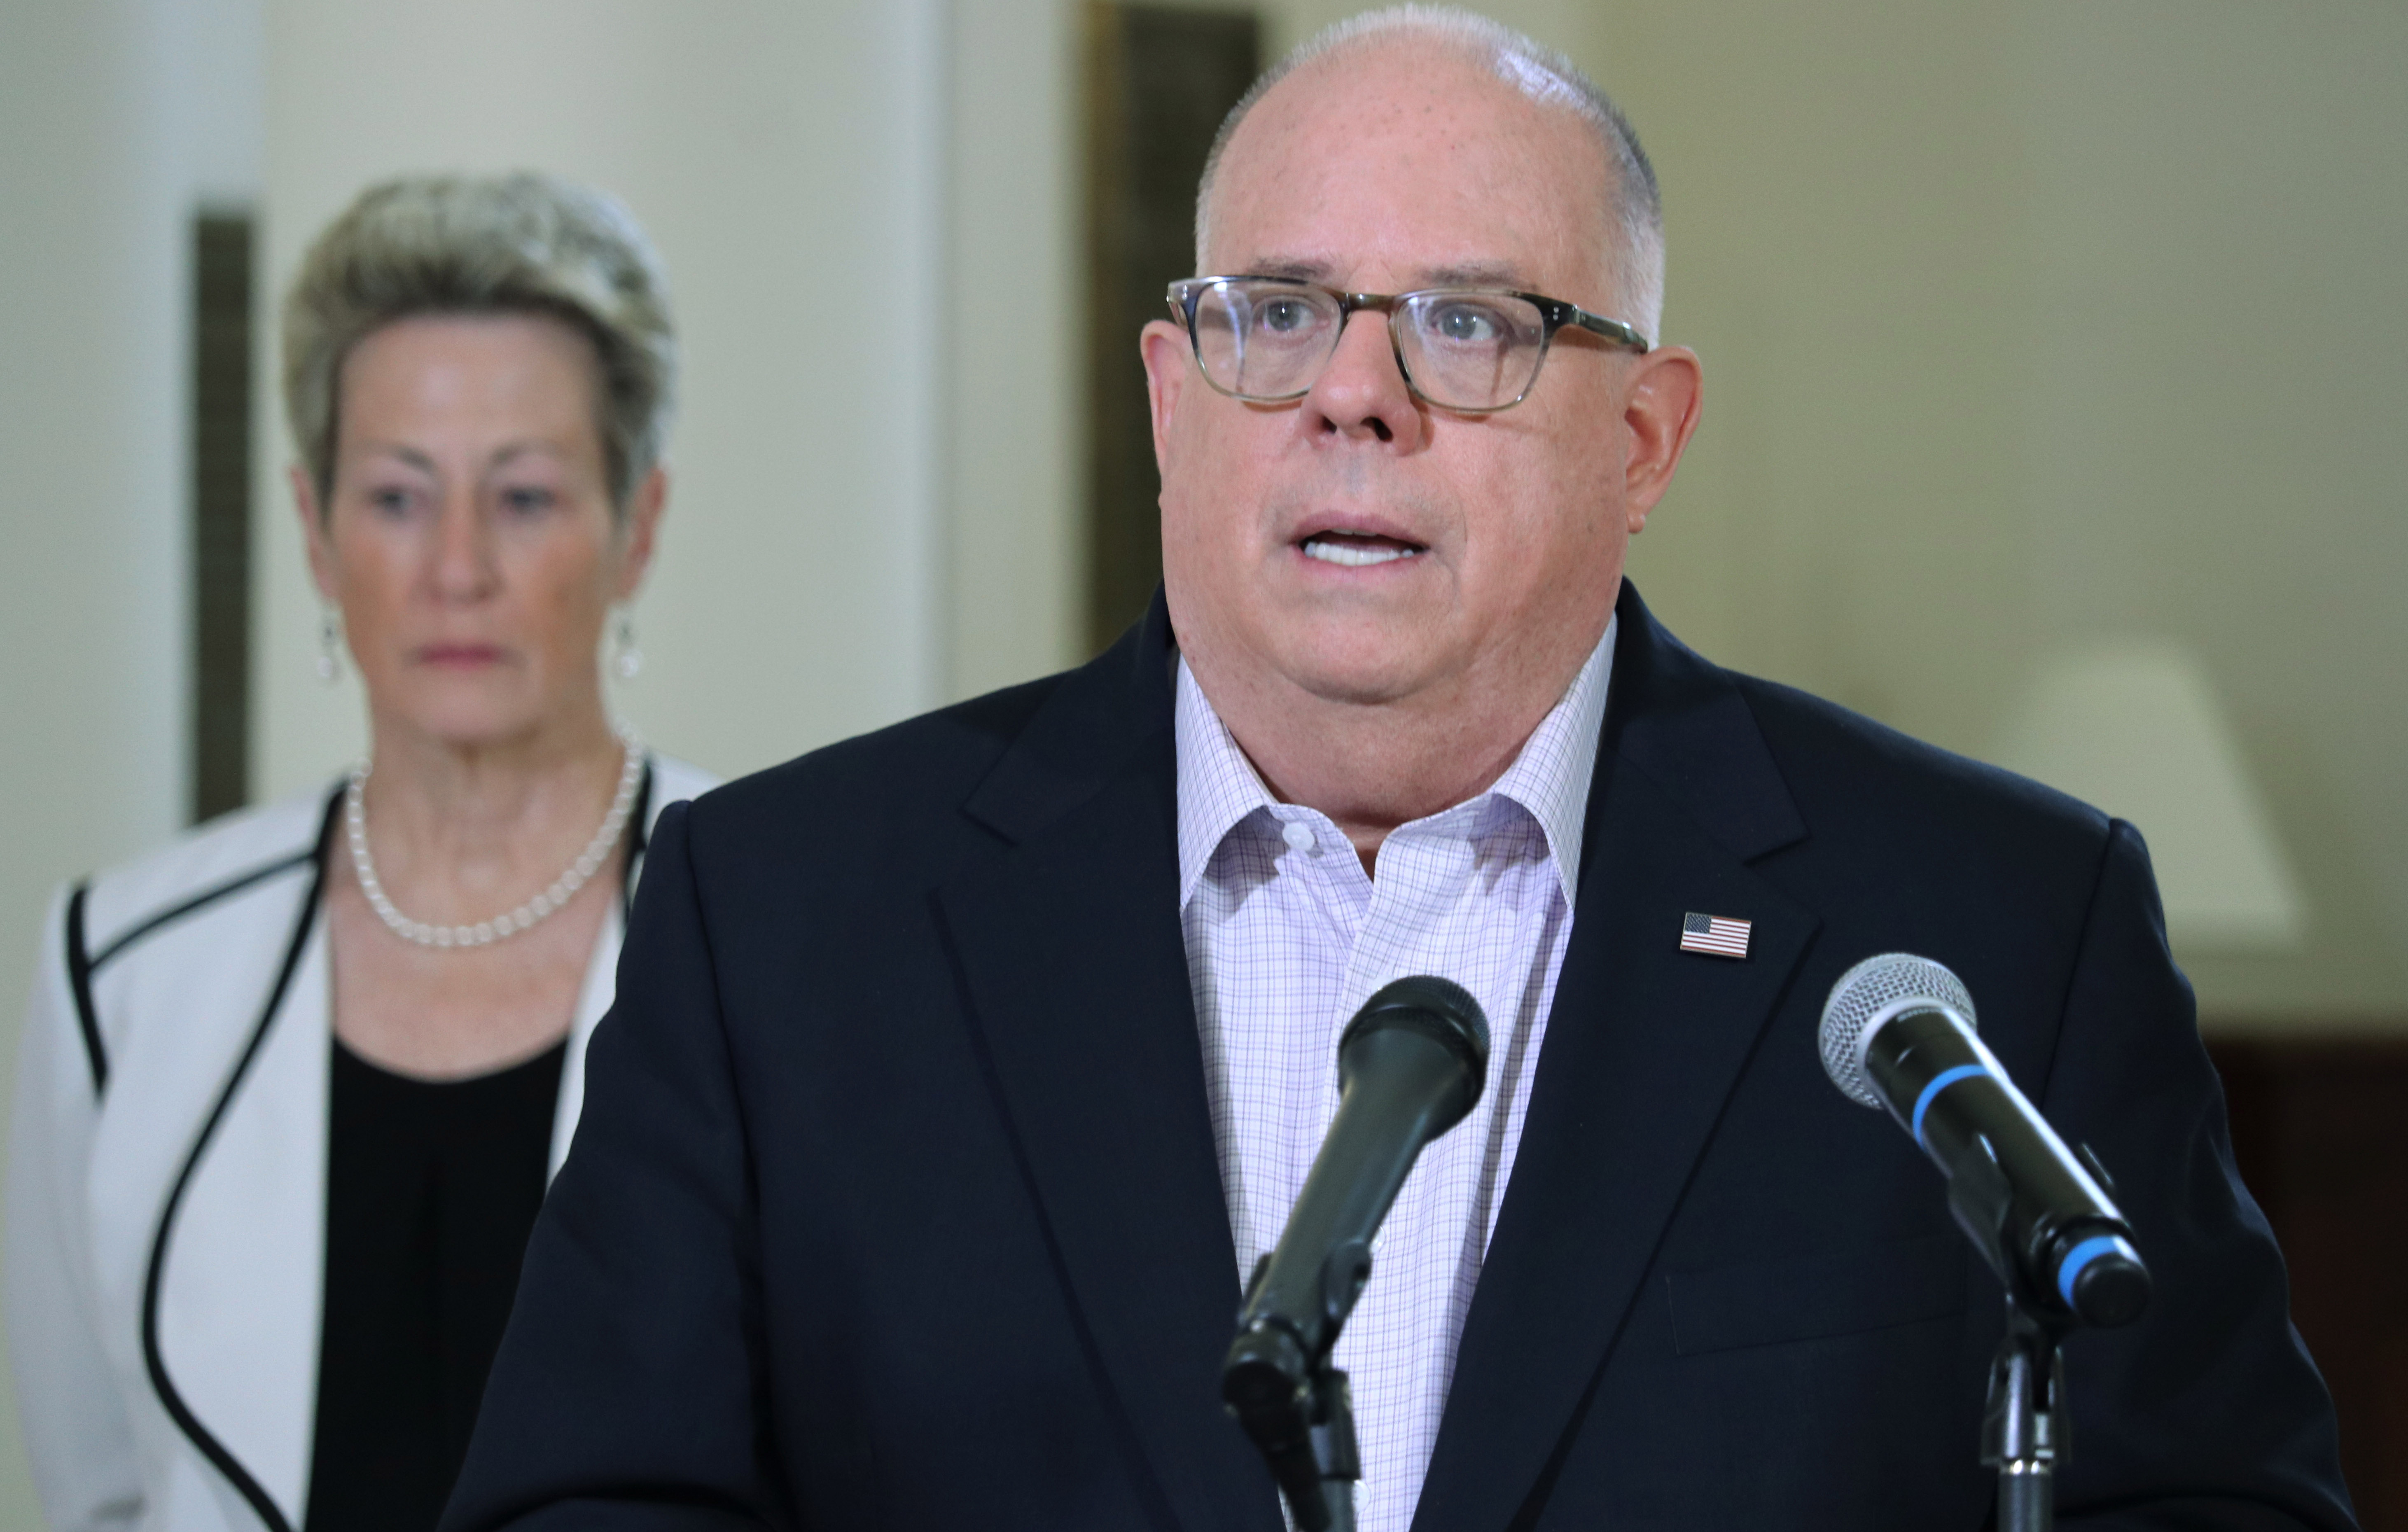 Maryland Gov. Larry Hogan speaks at a news conference in Annapolis, Maryland, on April 3.